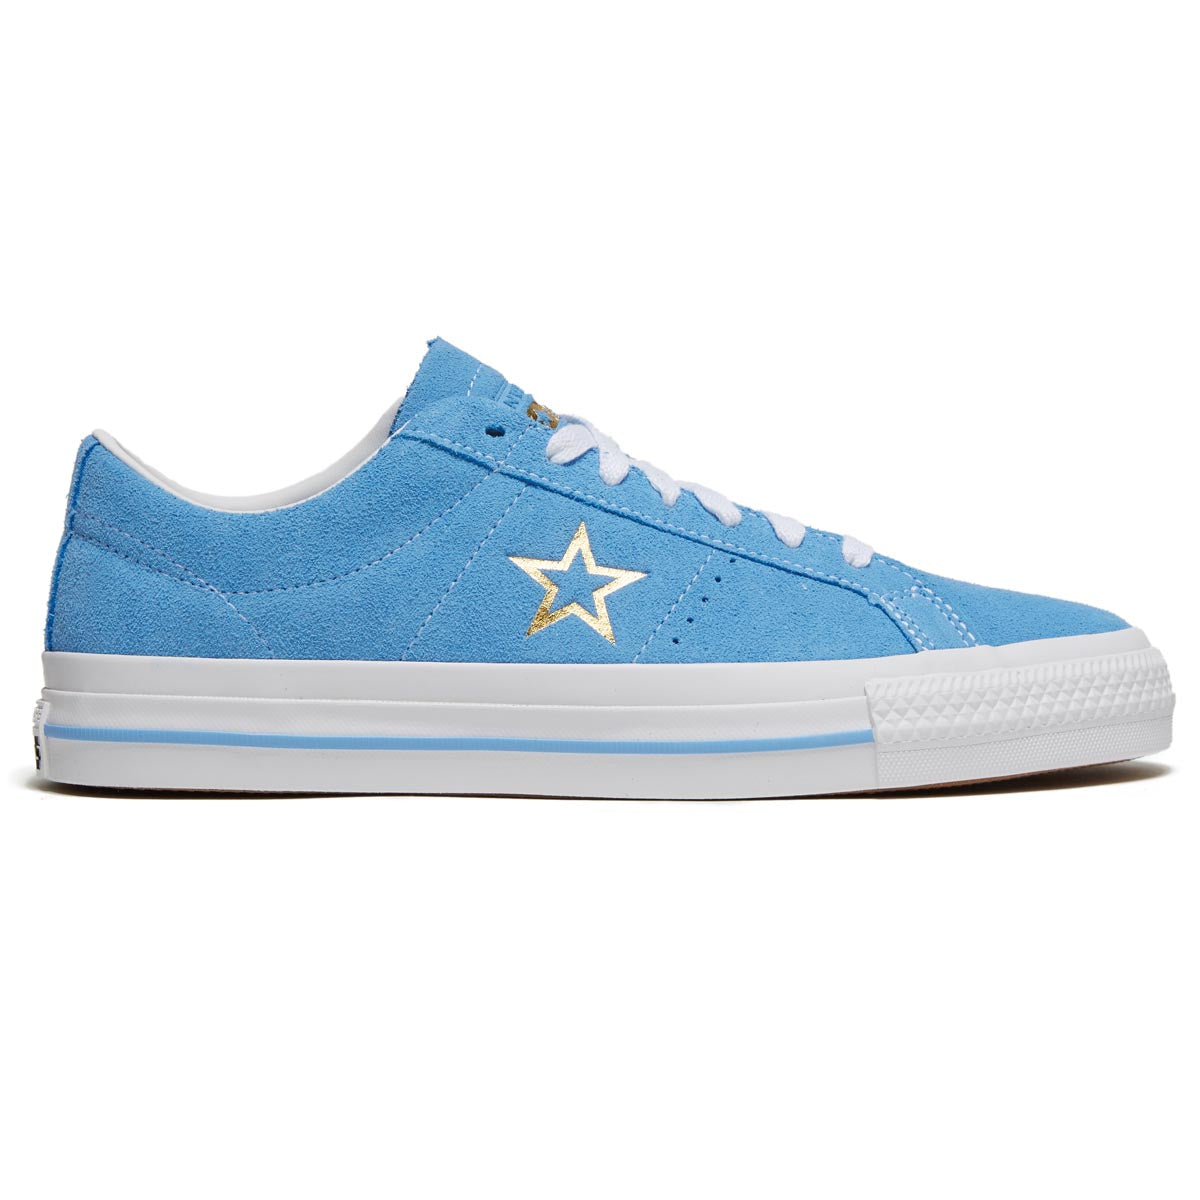 Converse One Star Pro Suede Ox Shoes - Light Blue/White/Gold image 1